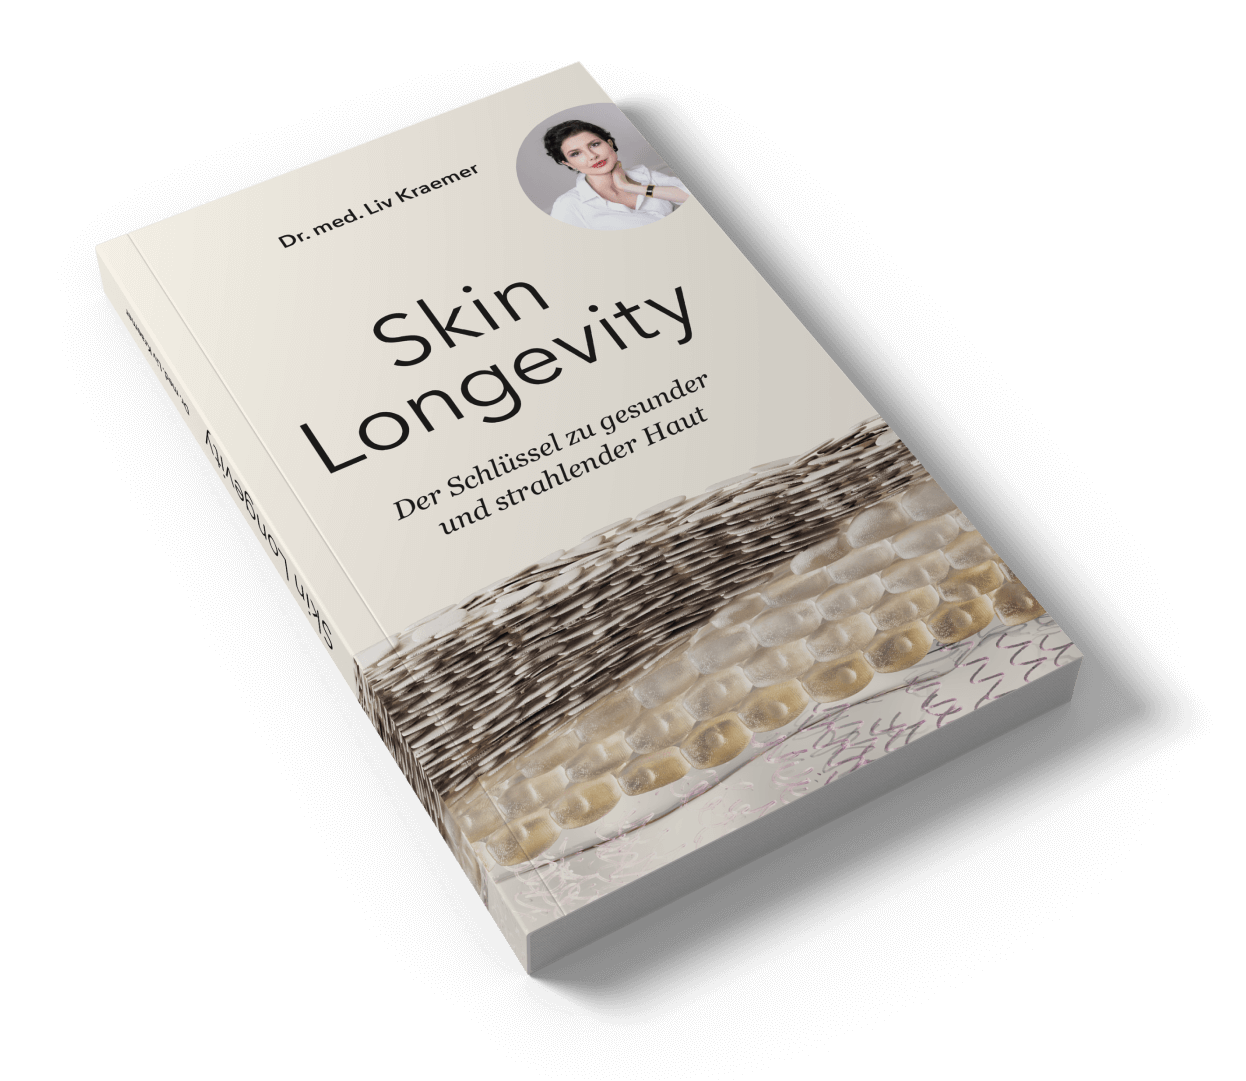 "Skin Longevity - Der Schlüssel zu gesunder und strahlender Haut" is a book written by skin longevity expert and dermatologist Dr. Liv Kraemer, which explains how the skin works from acne and redness to blemishes, wrinkles, botox, hair removal and its effects on the skin, and much more. 